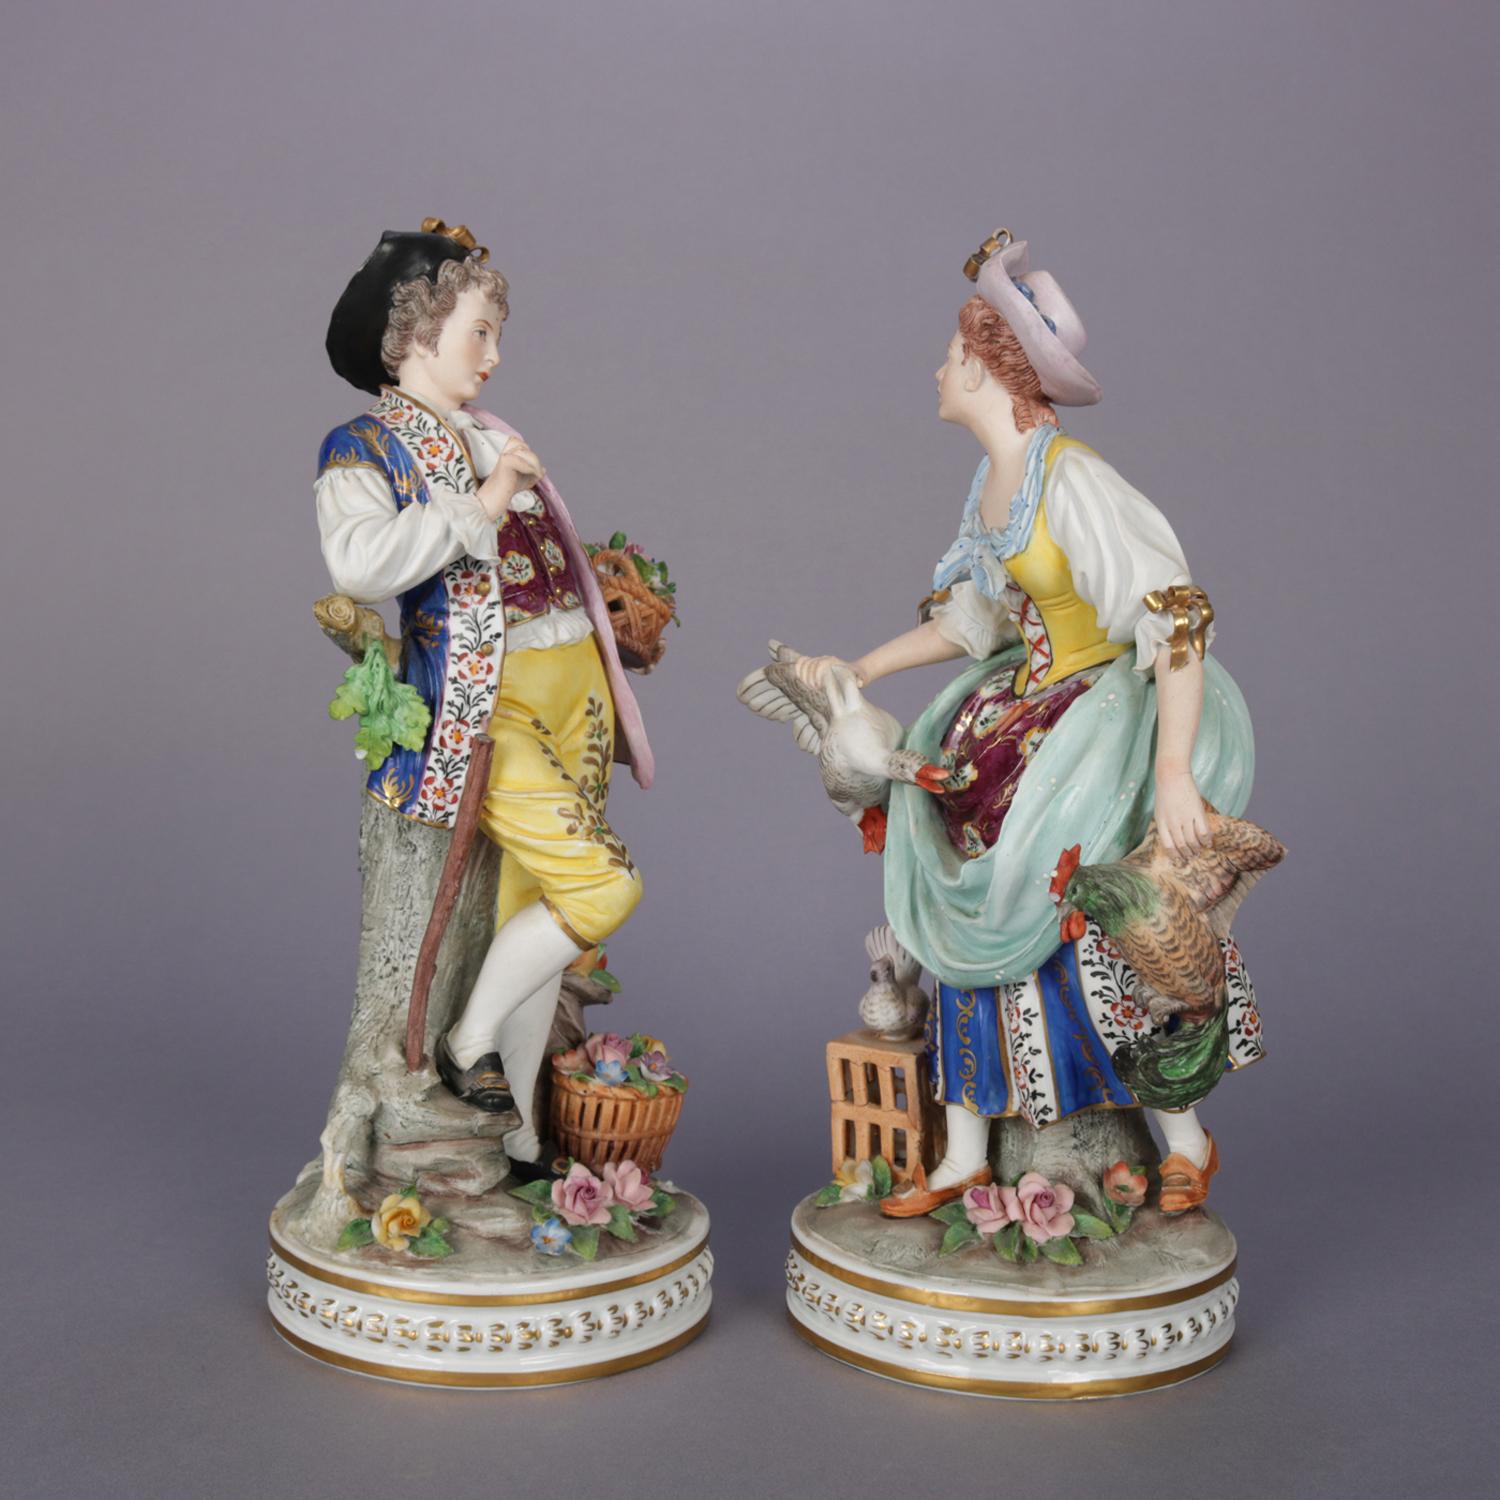 Antique and large pair of Chelsea School hand painted porcelain figures feature courting couple in countryside setting with man having birds, fruit and flowers and woman having pheasant, gilt highlights throughout, circa 1890

Measures - Female